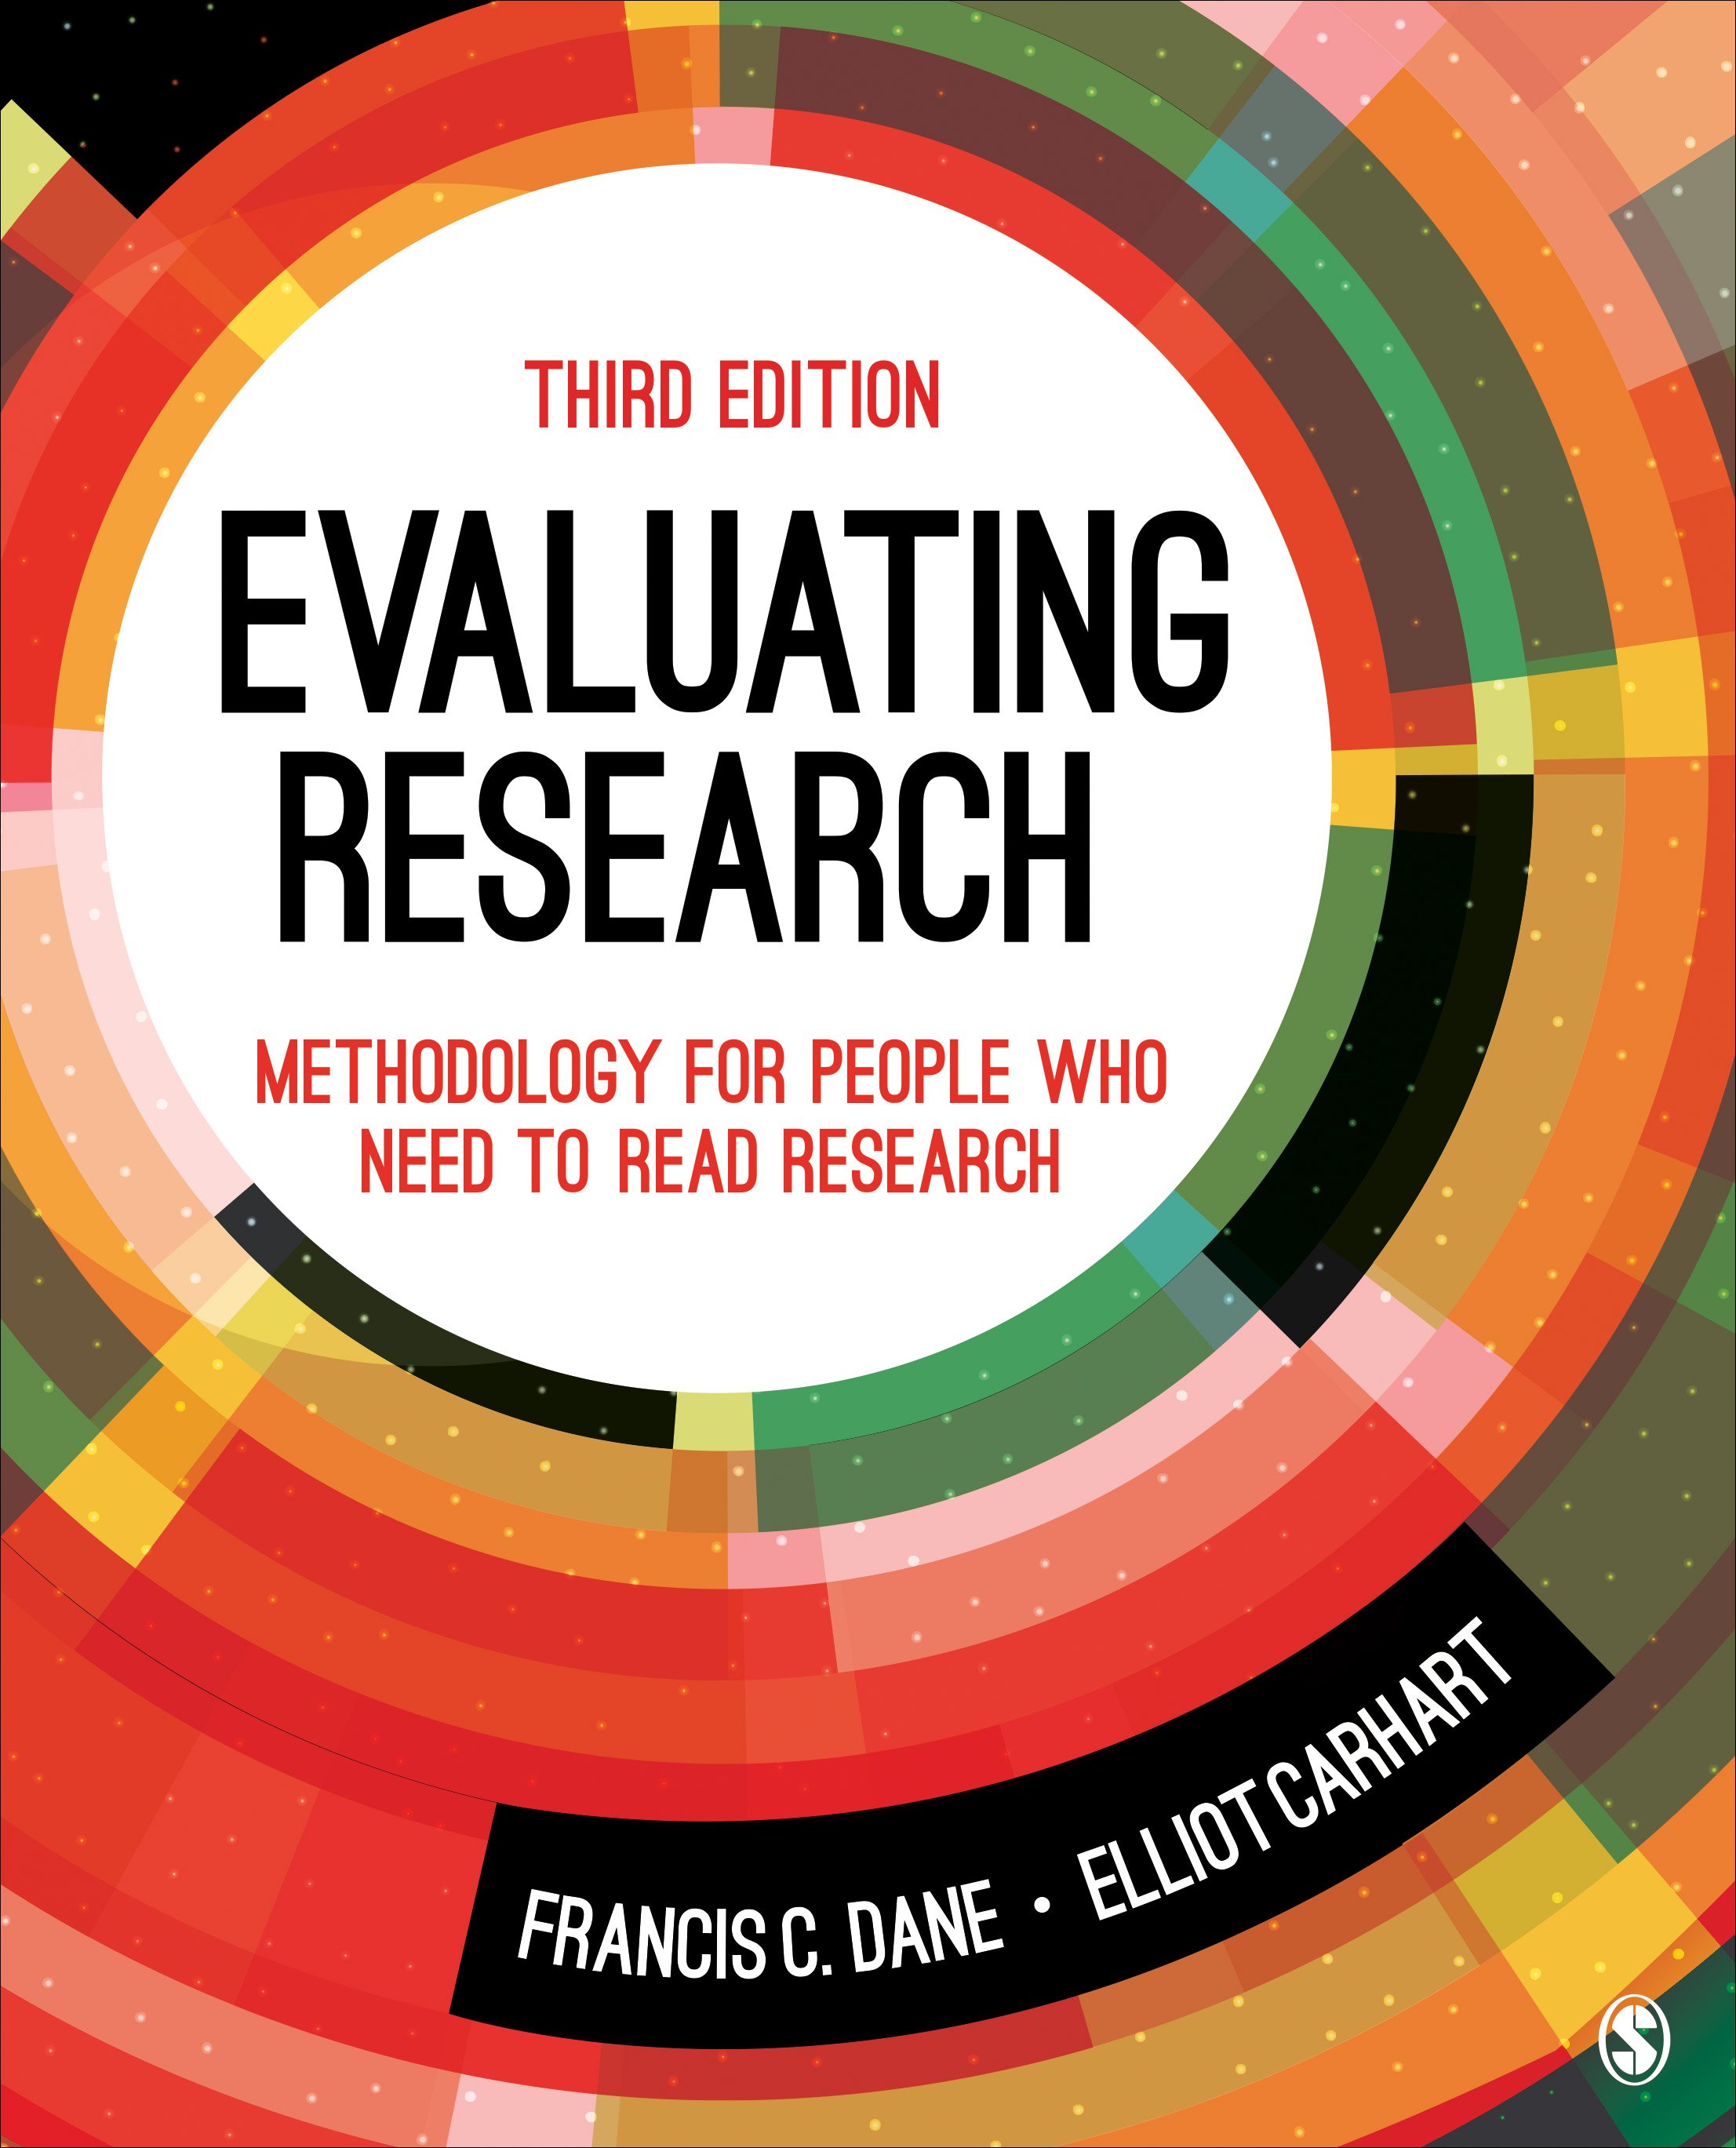 Evaluating Research book cover